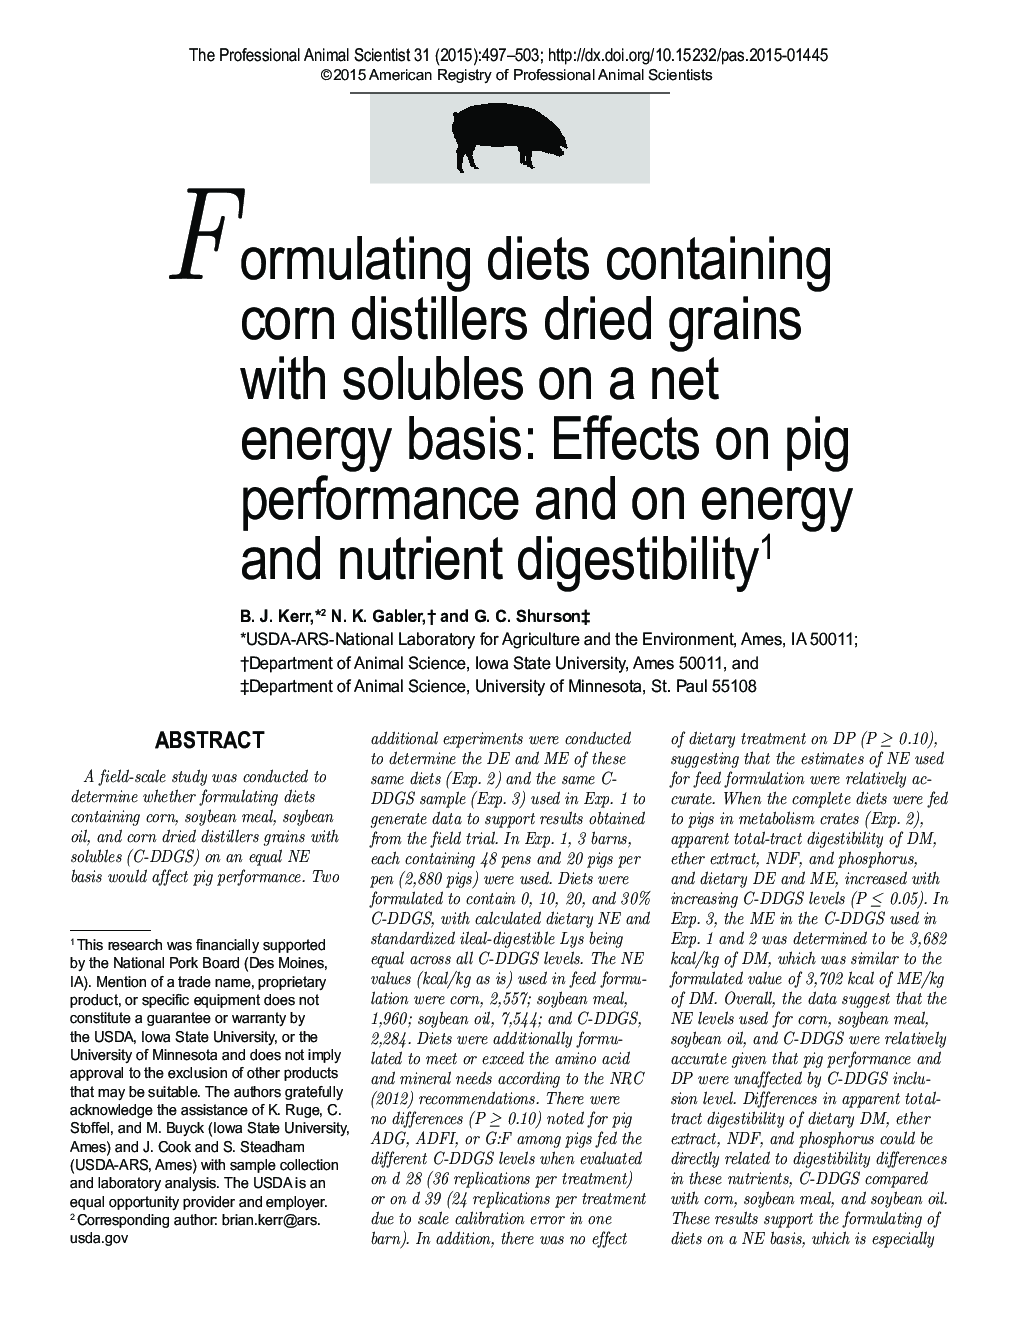 Formulating diets containing corn distillers dried grains with solubles on a net energy basis: Effects on pig performance and on energy and nutrient digestibility1